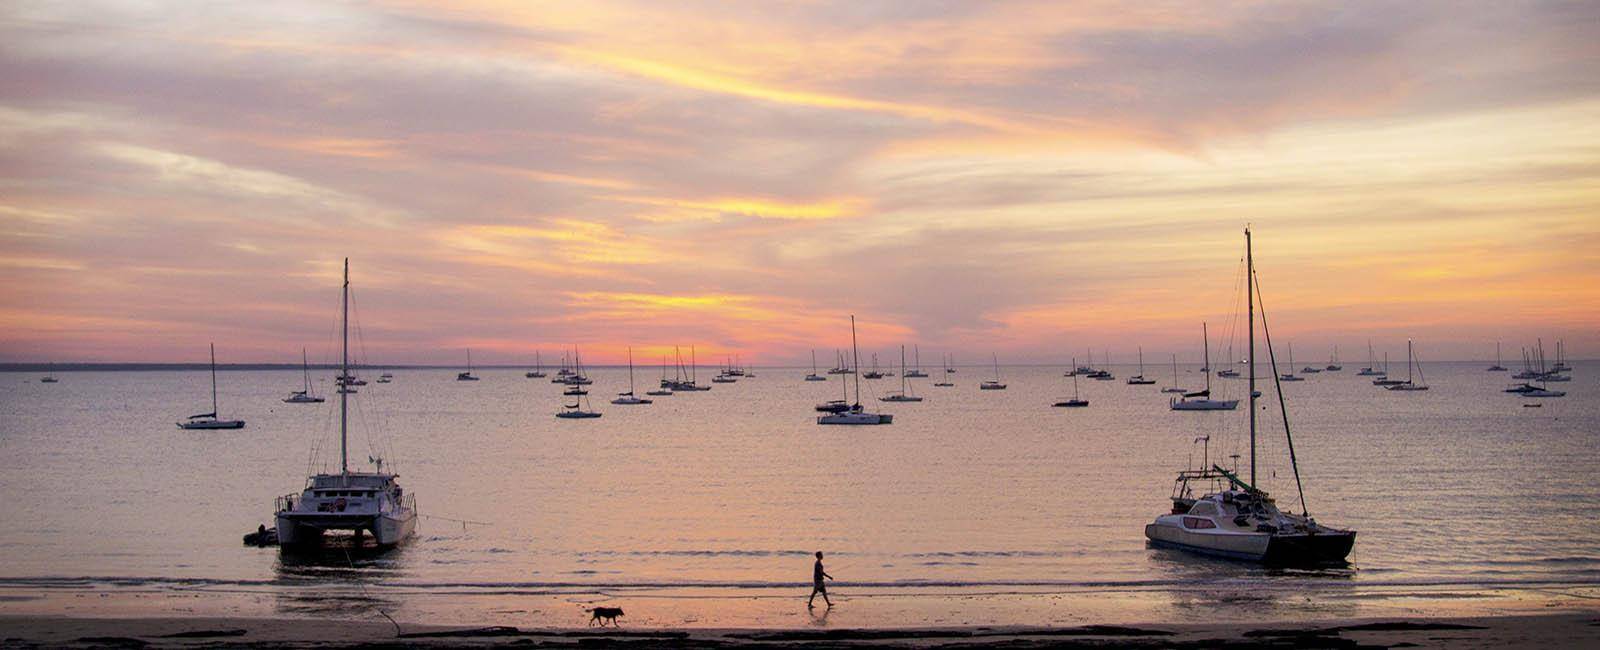 Fannie Bay at sunset | Dawn to dusk outdoors in Darwin